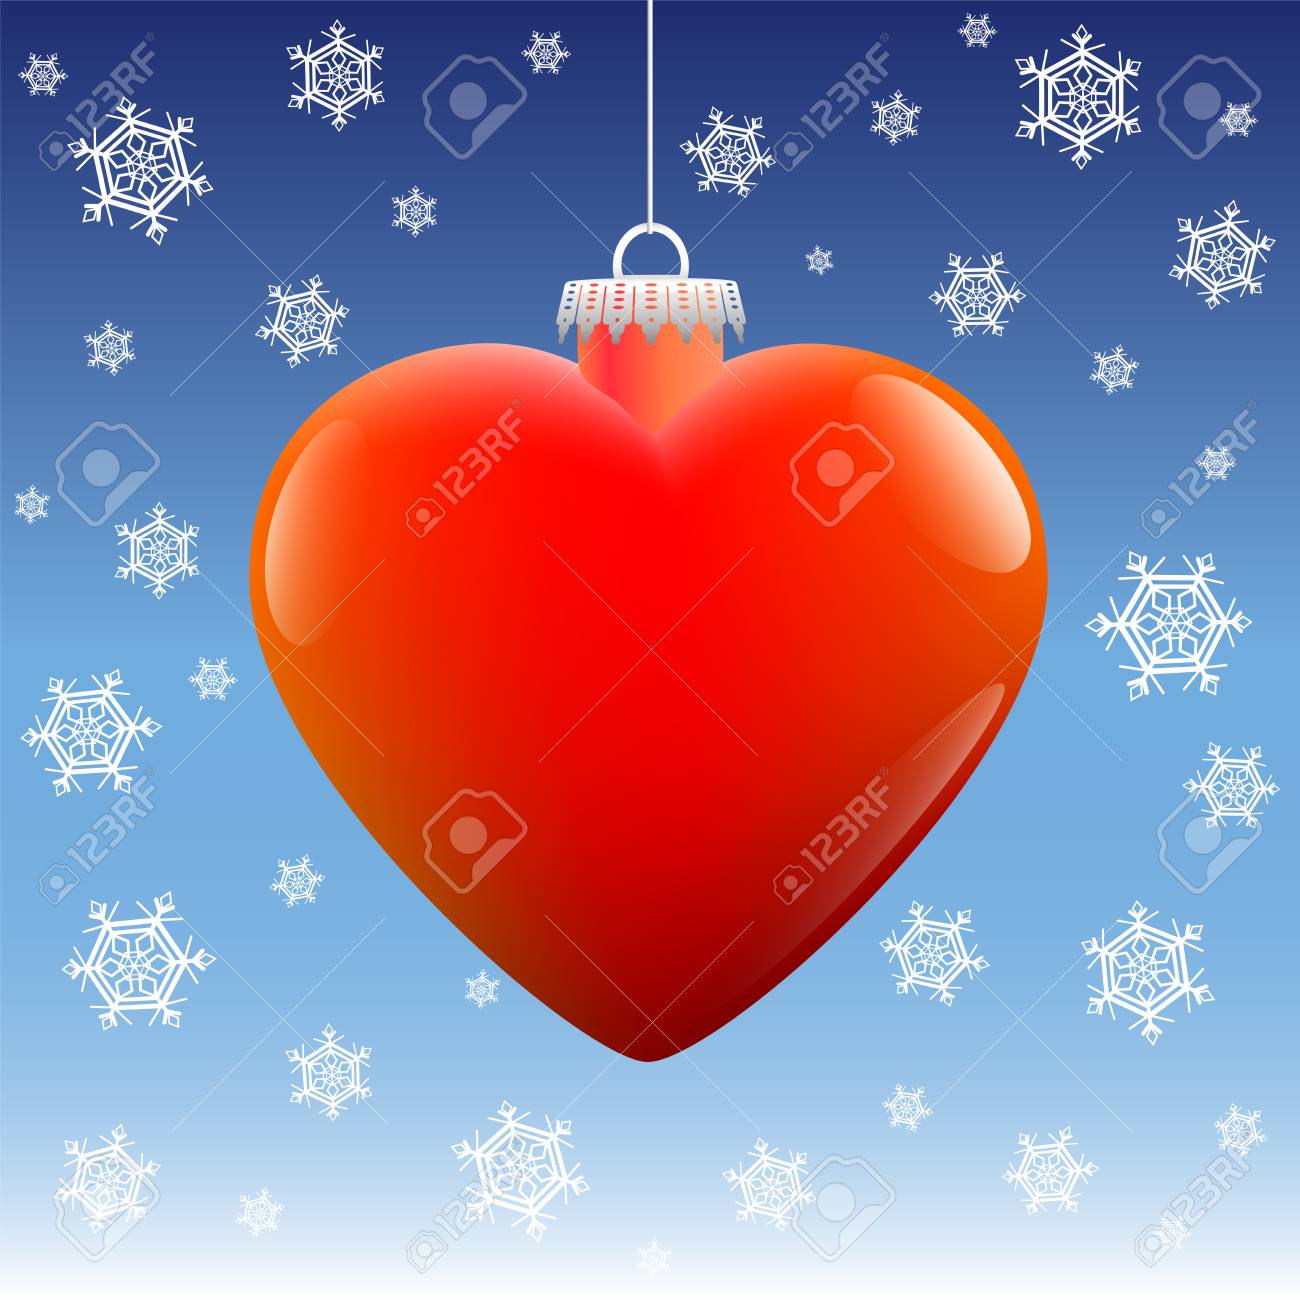 Heart Shaped Christmas Ball Hanging Against A Placid Winter